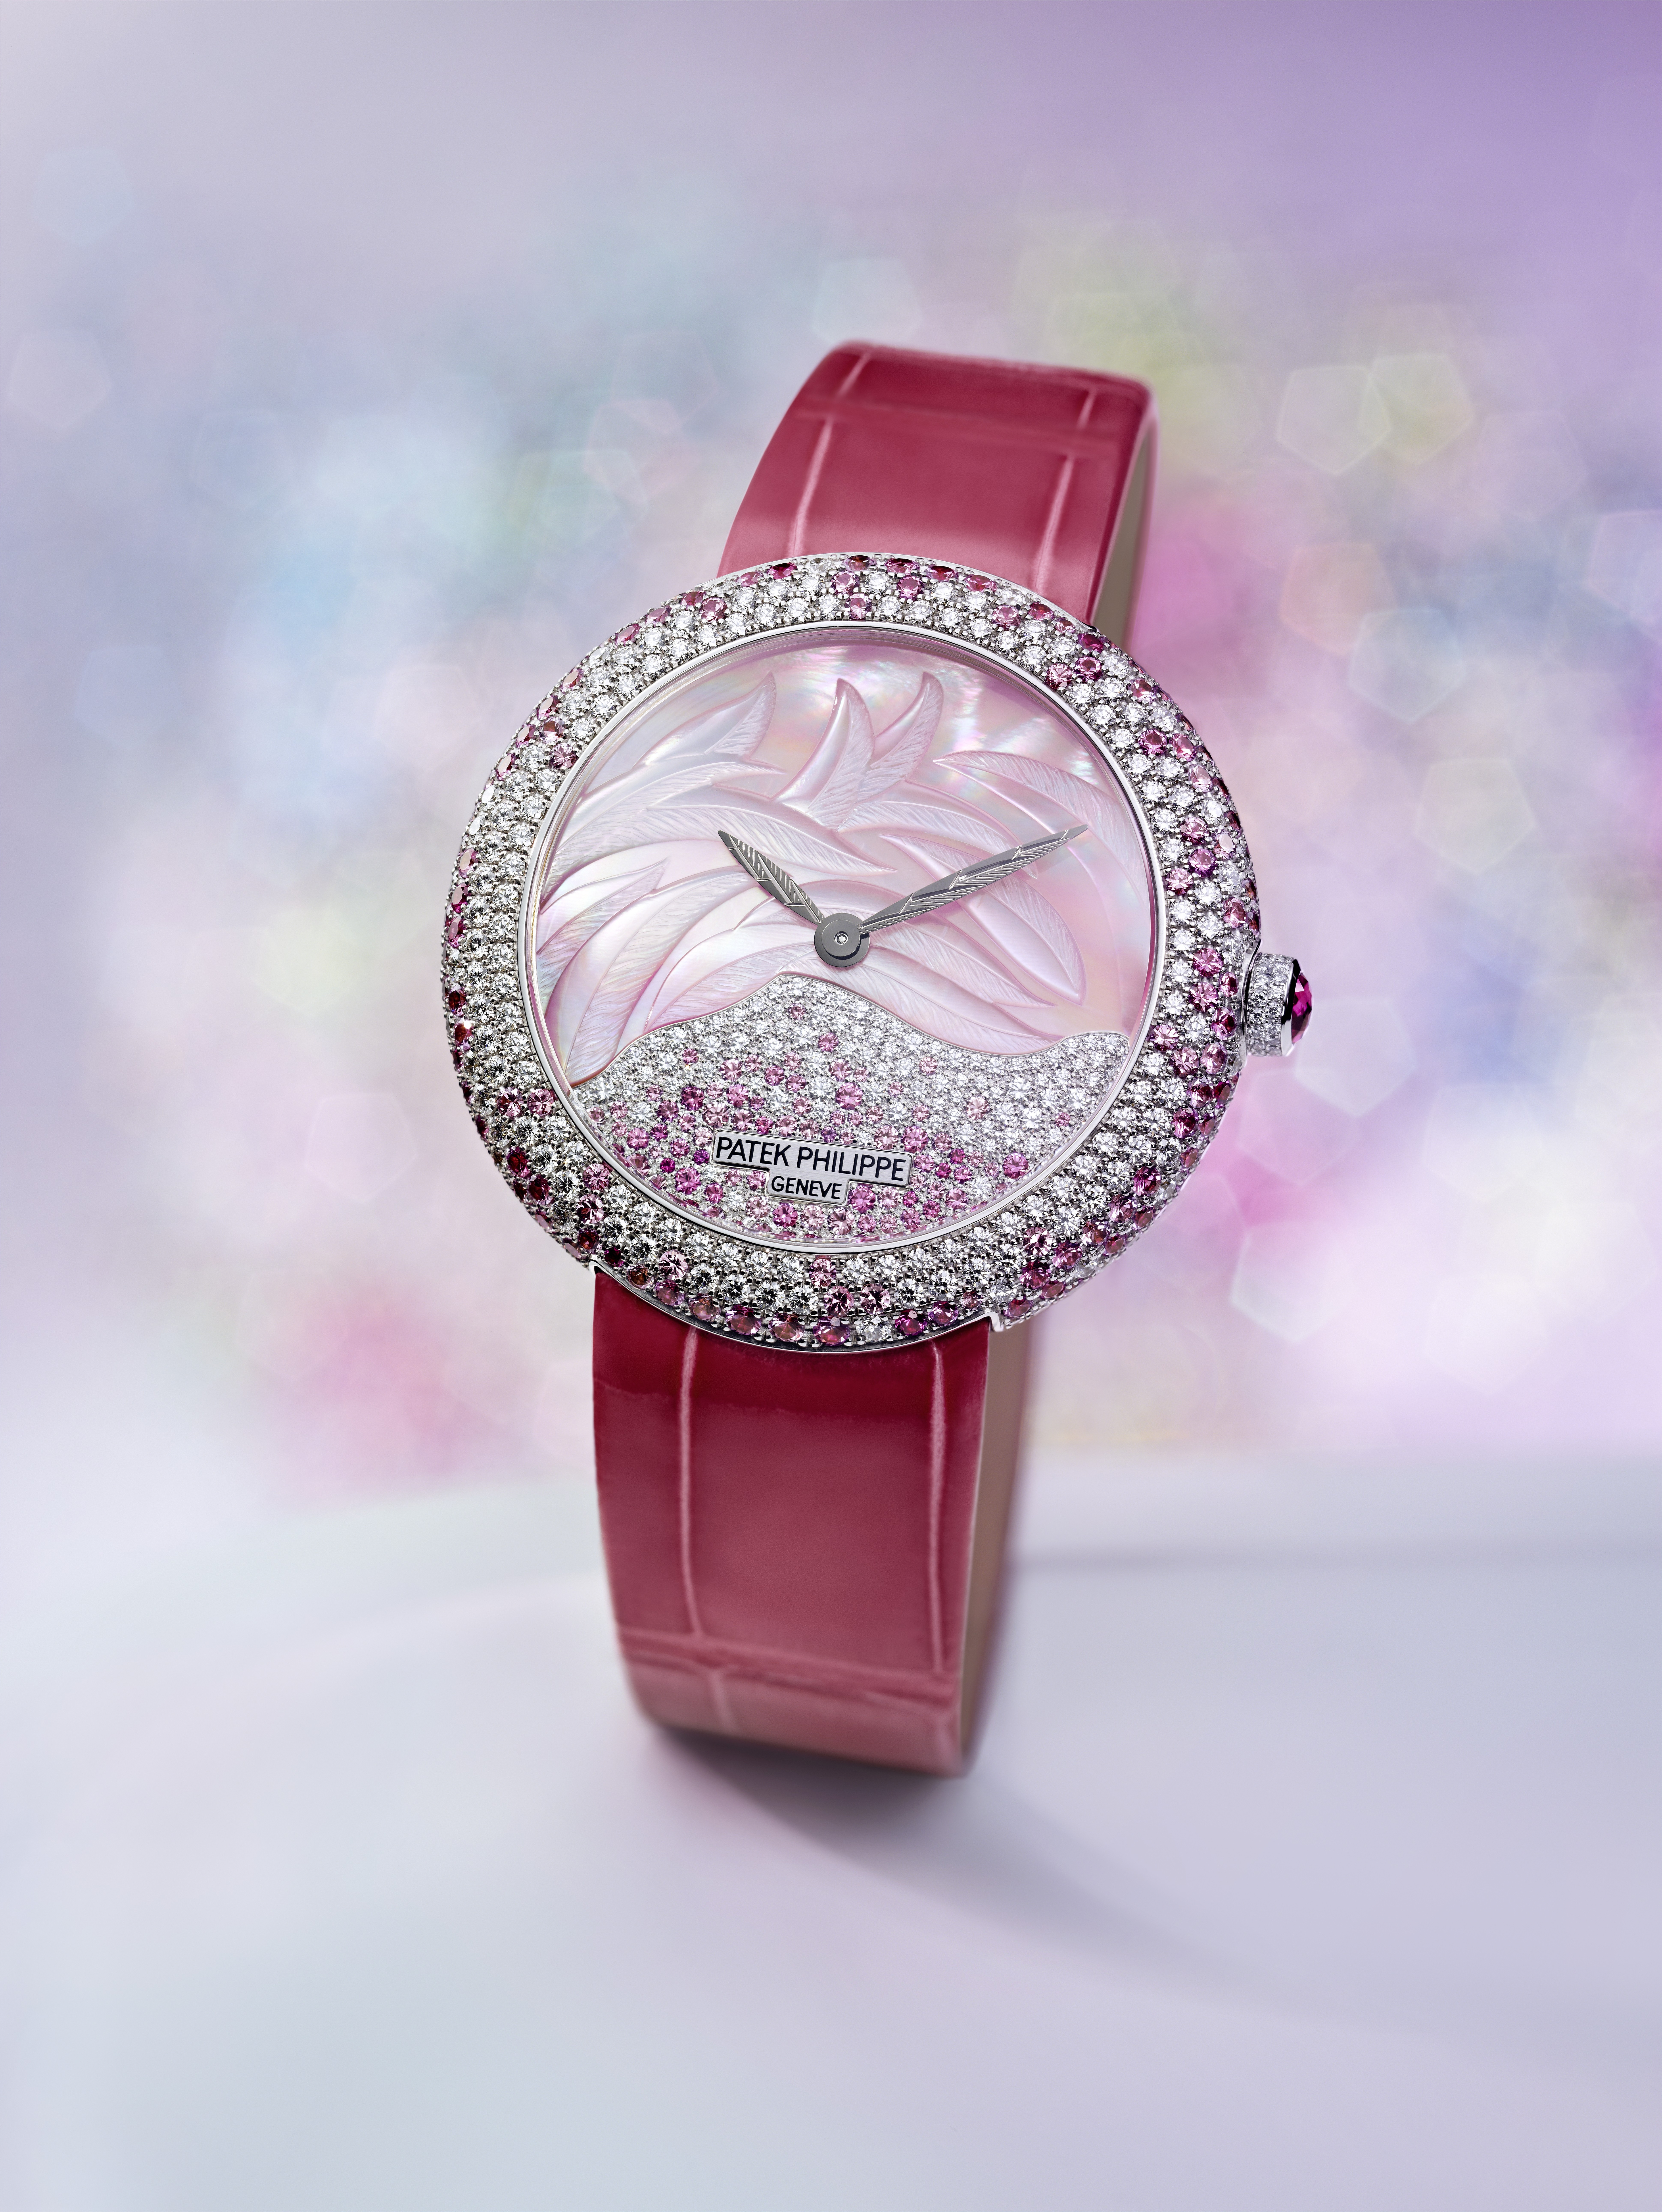 Patek Philippe’s Calatrava Haute Joaillerie Ref. 4899 is decorated with a mother-of-pearl dial and a mixture of diamonds and rose sapphires.